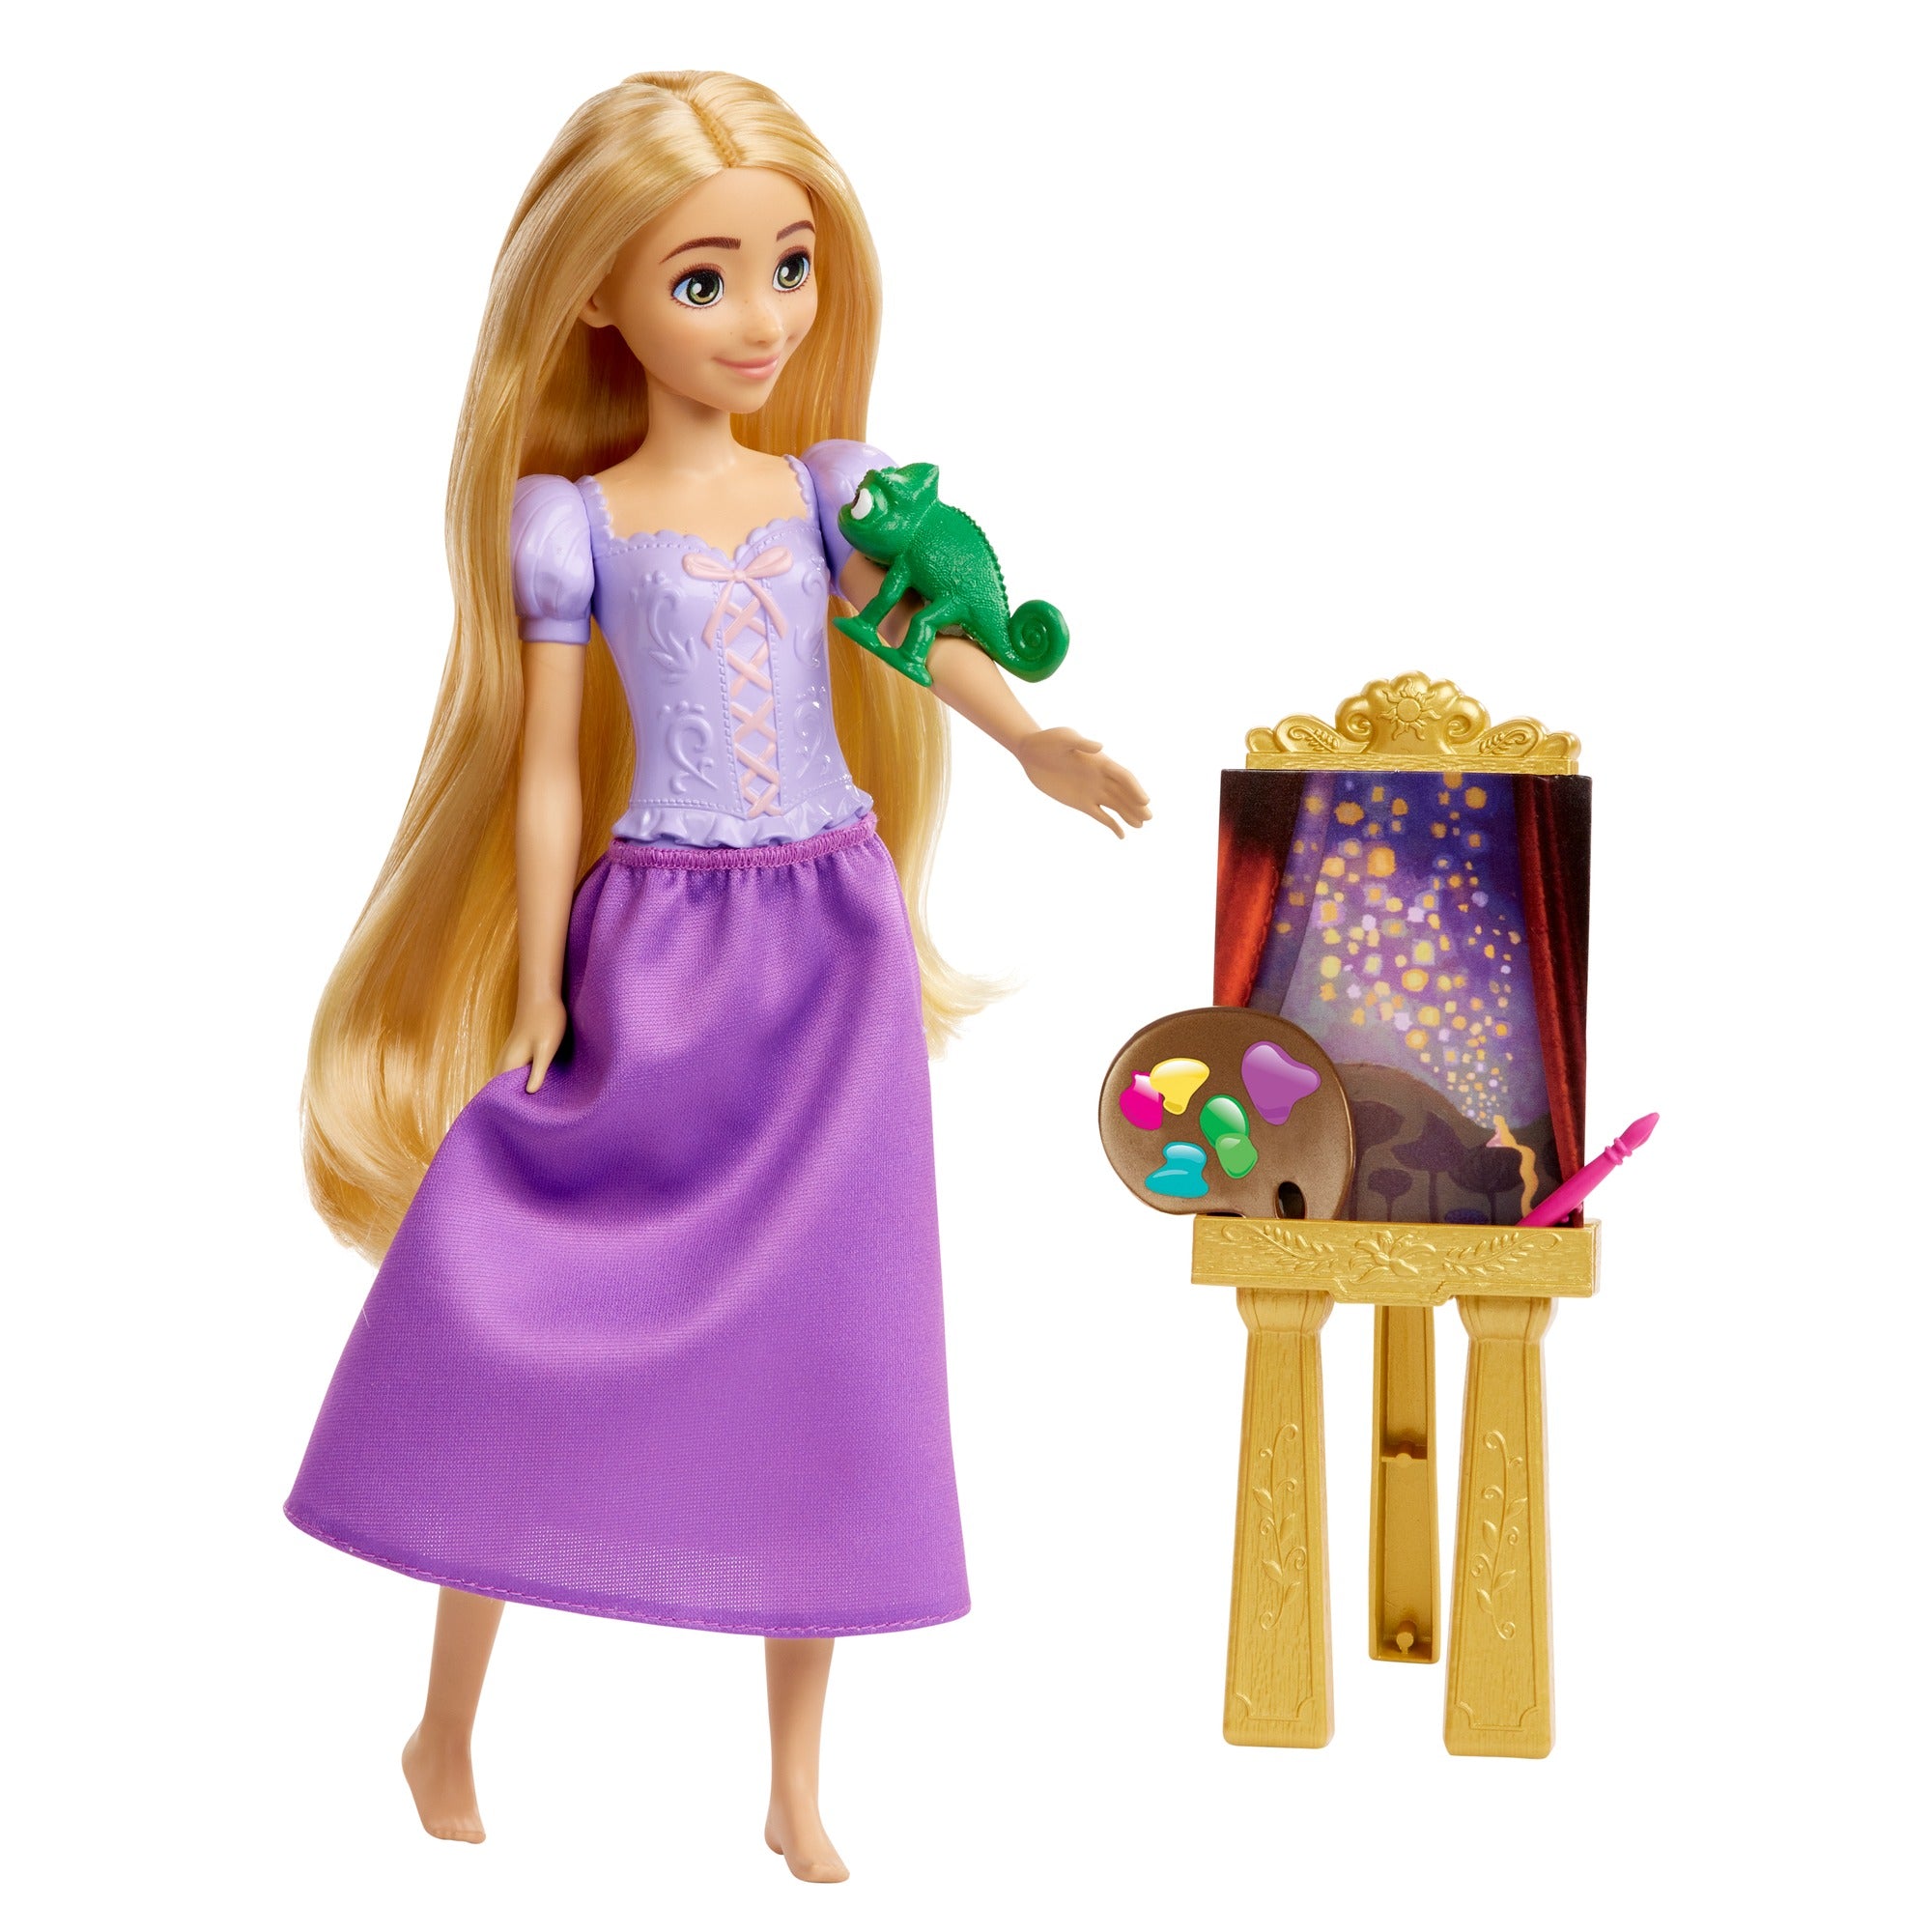 Disney Princess Rapunzel Fashion Doll with Pascal Figure and Accessories Inspired by the Disney Movie for Kids Ages 3+